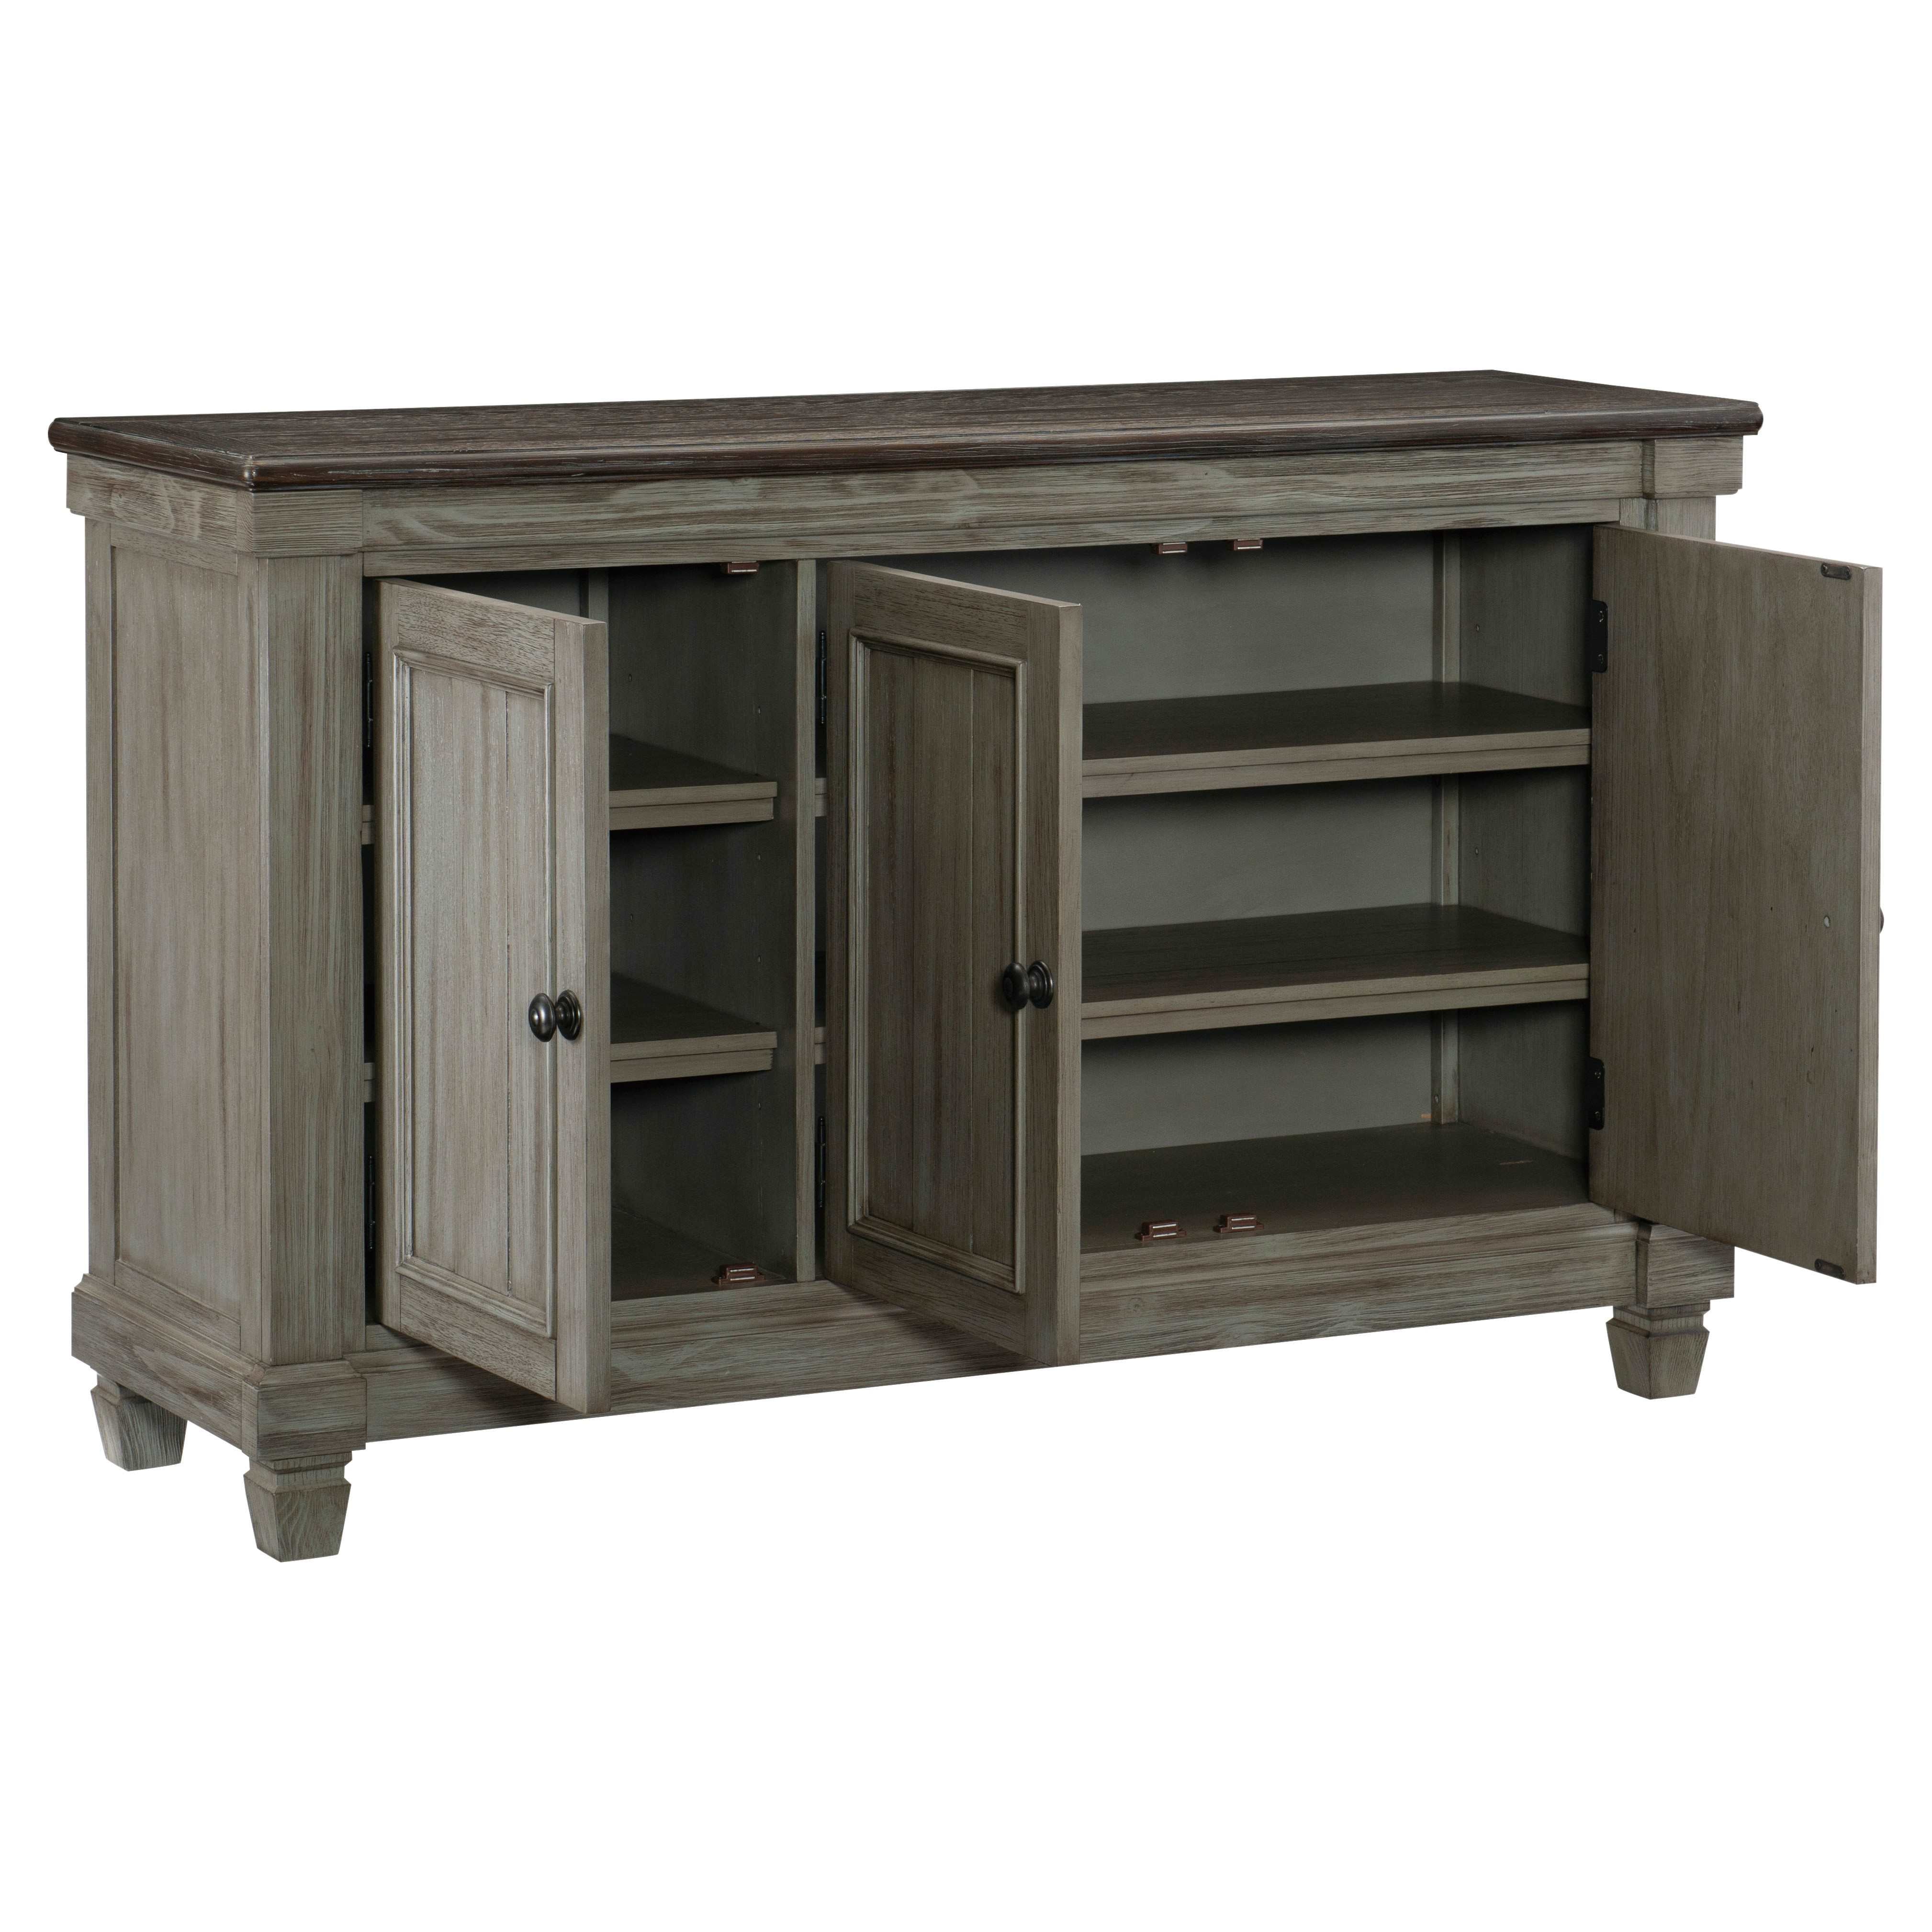 Granby Dining Collection 5627GY-72